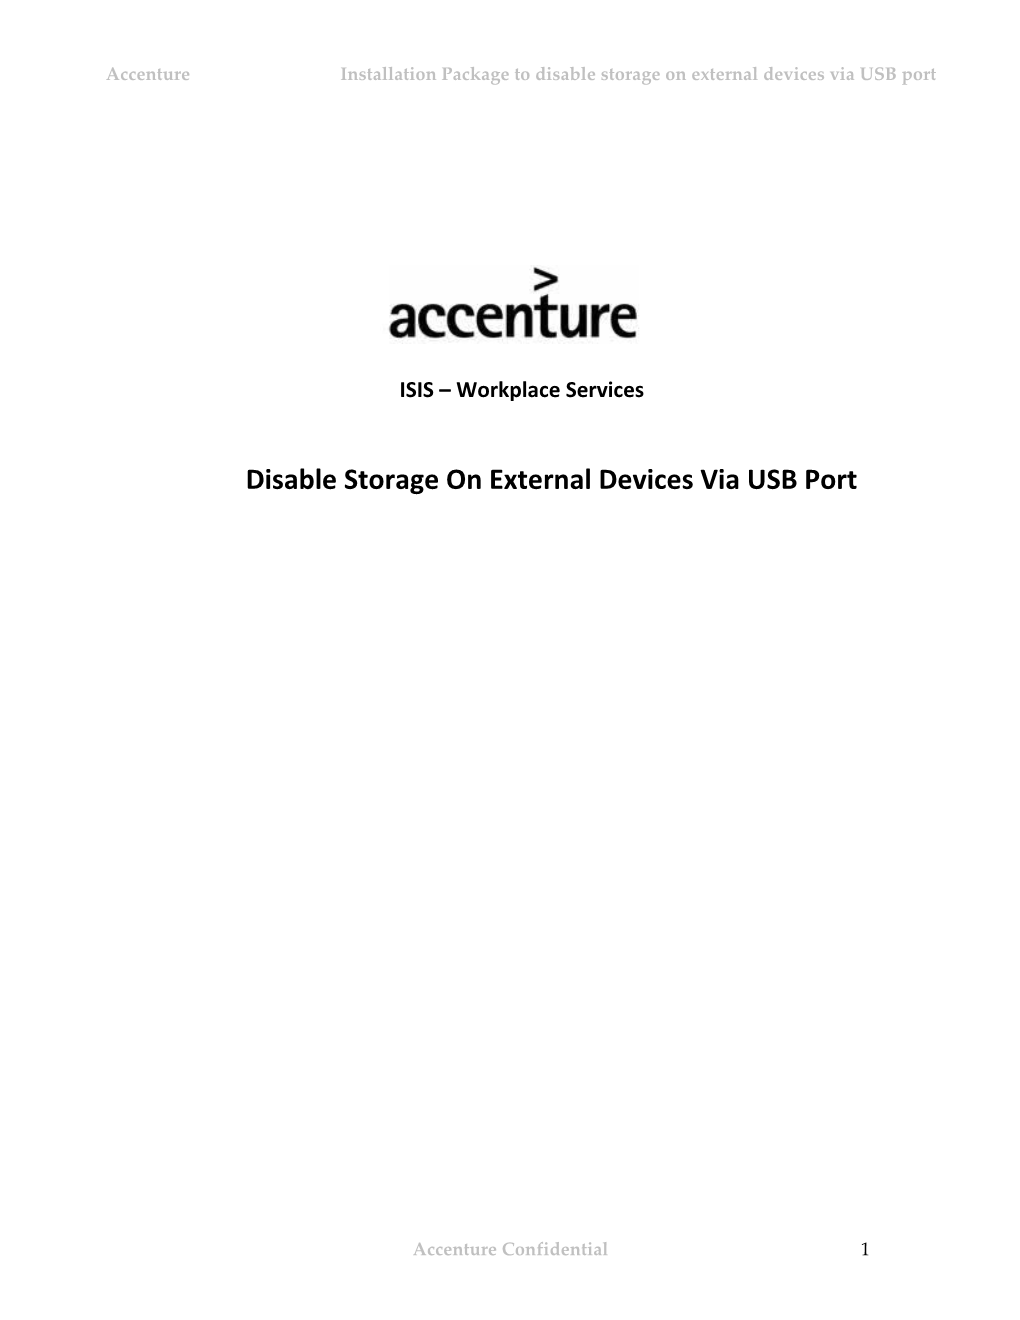 Accenture Installation Package to Disable Storage on External Devices Via USB Port